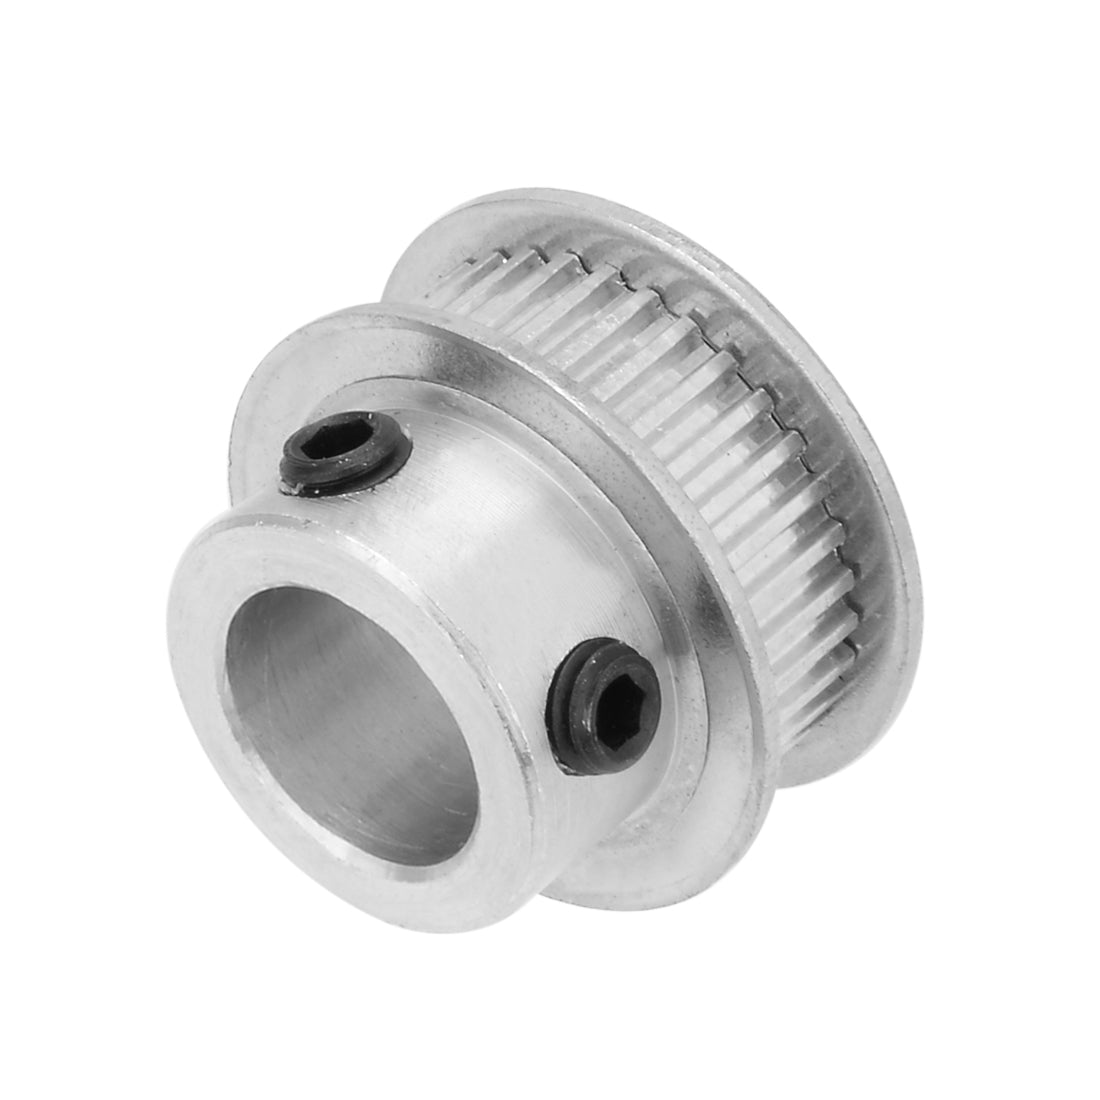 uxcell Uxcell Aluminum  35 Teeth 12mm Bore Timing Belt Idler Pulley Synchronous Wheel 6mm Belt for 3D Printer CNC